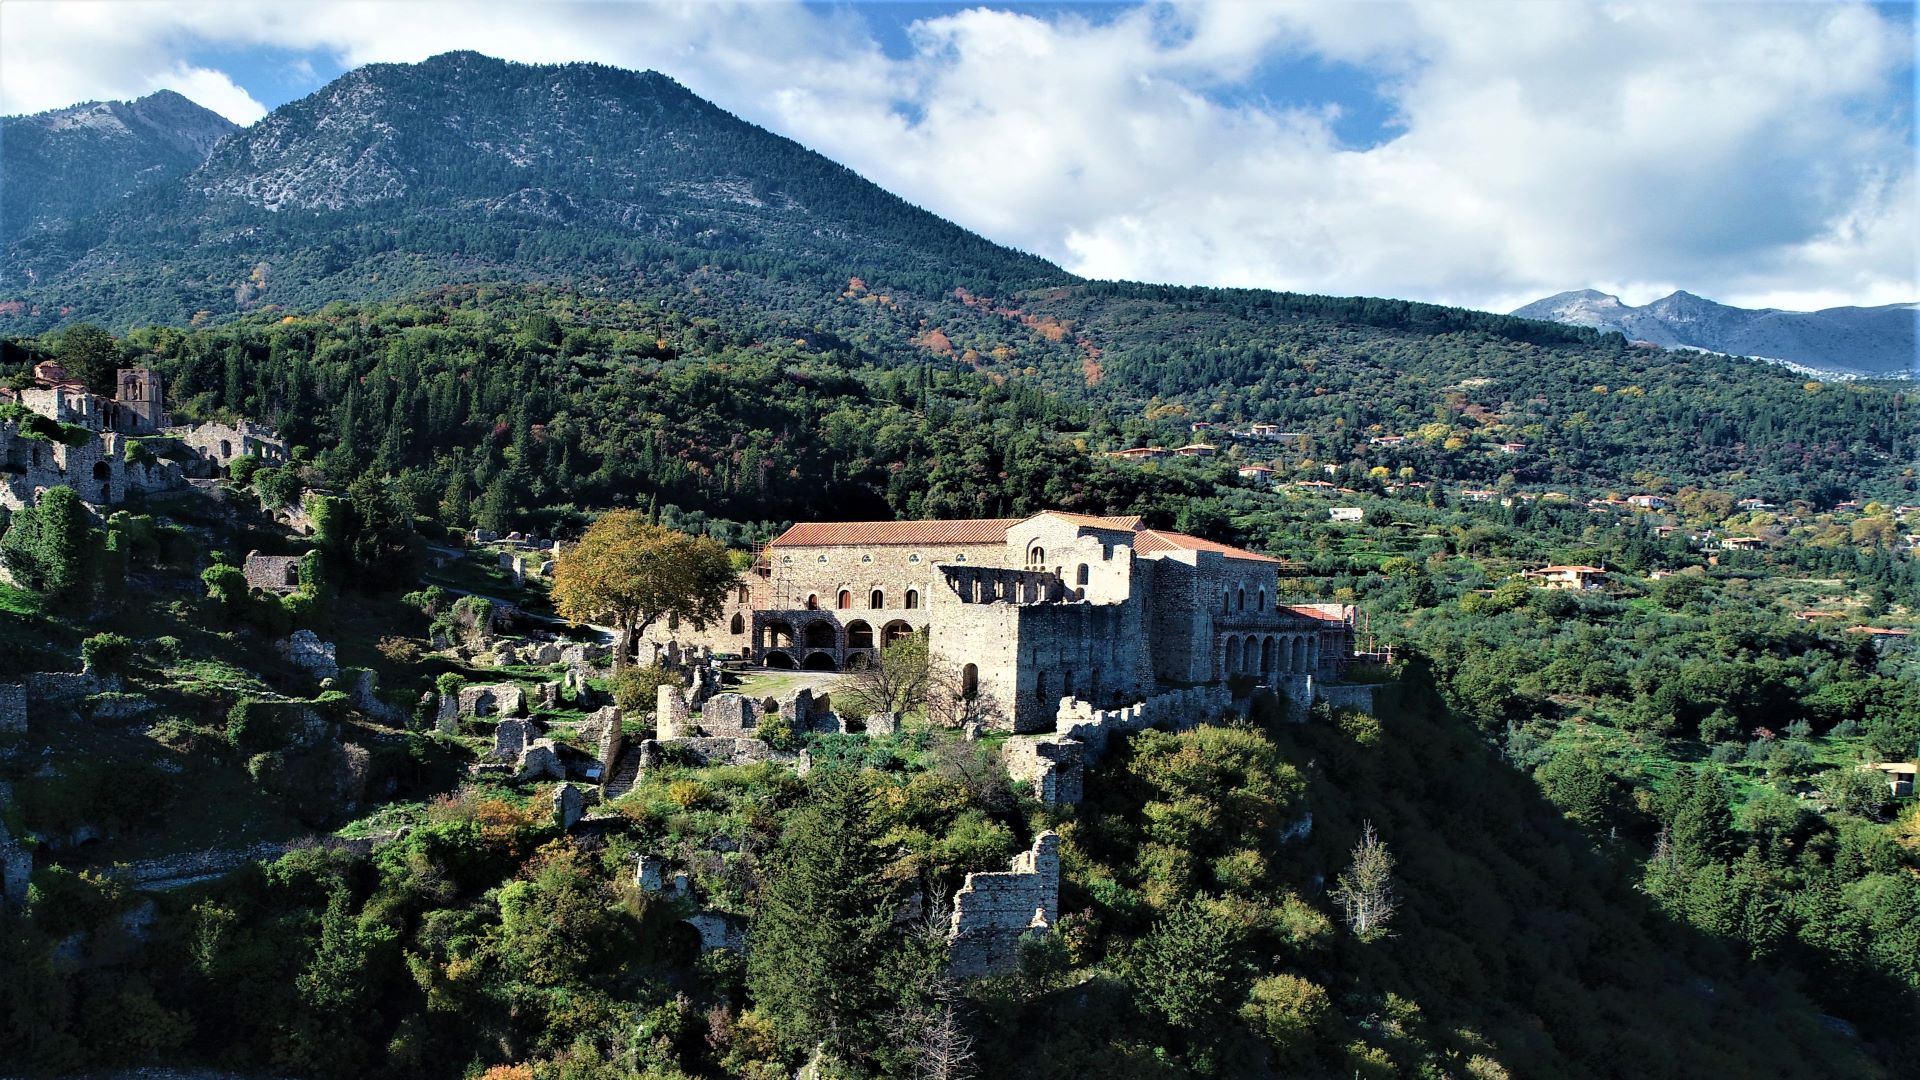 Image of the Mystras castle town